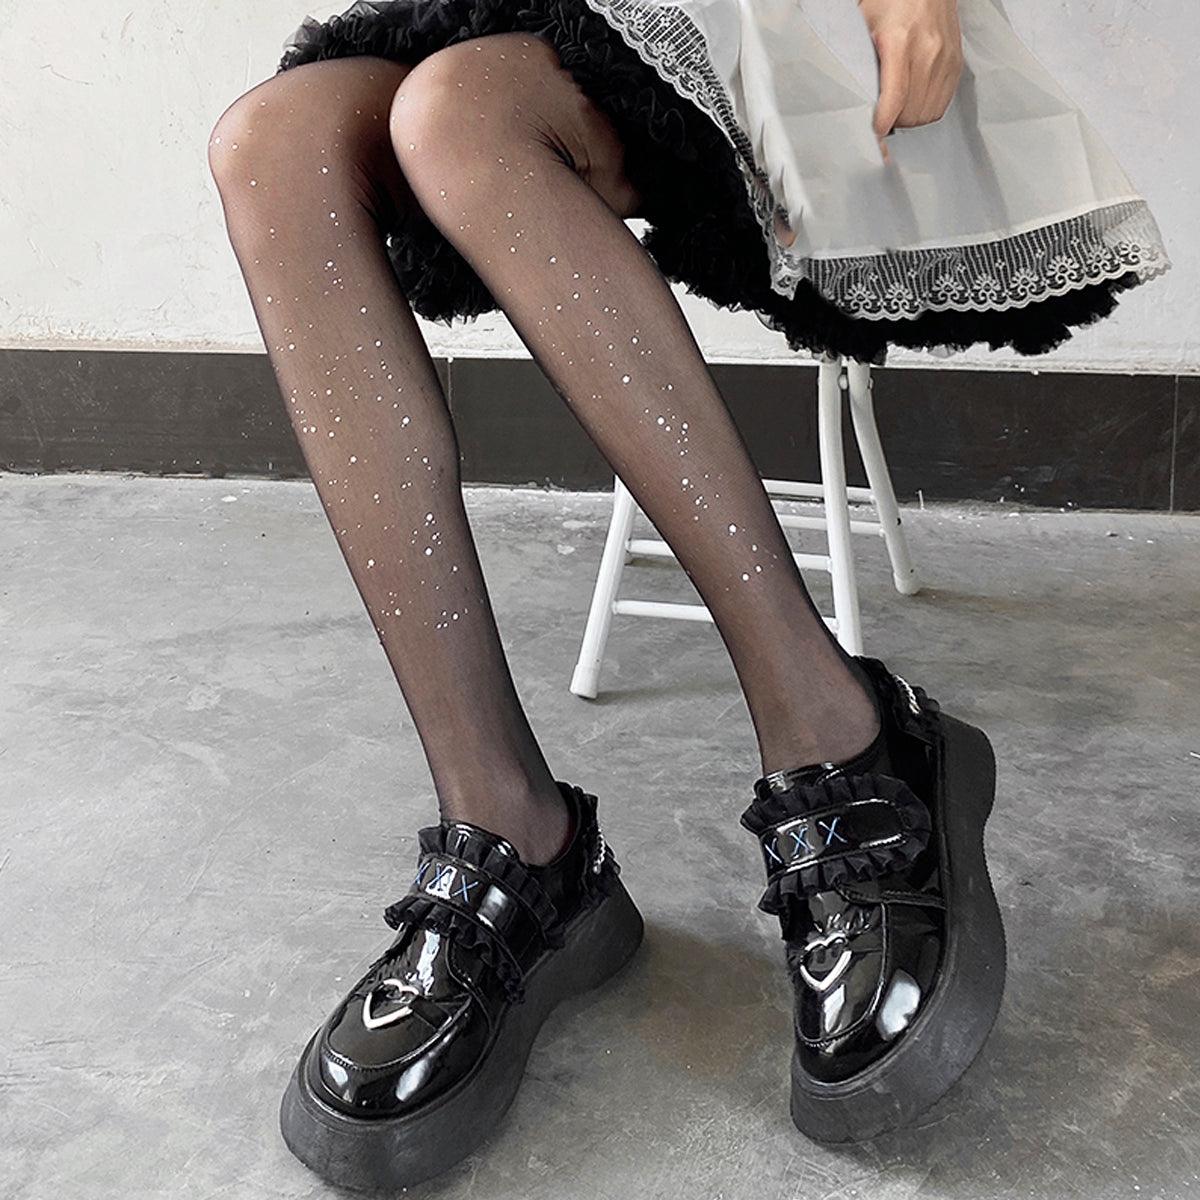 Stars Sparkles Tights Celestial Aesthetic - Aesthetic Clothes Shop